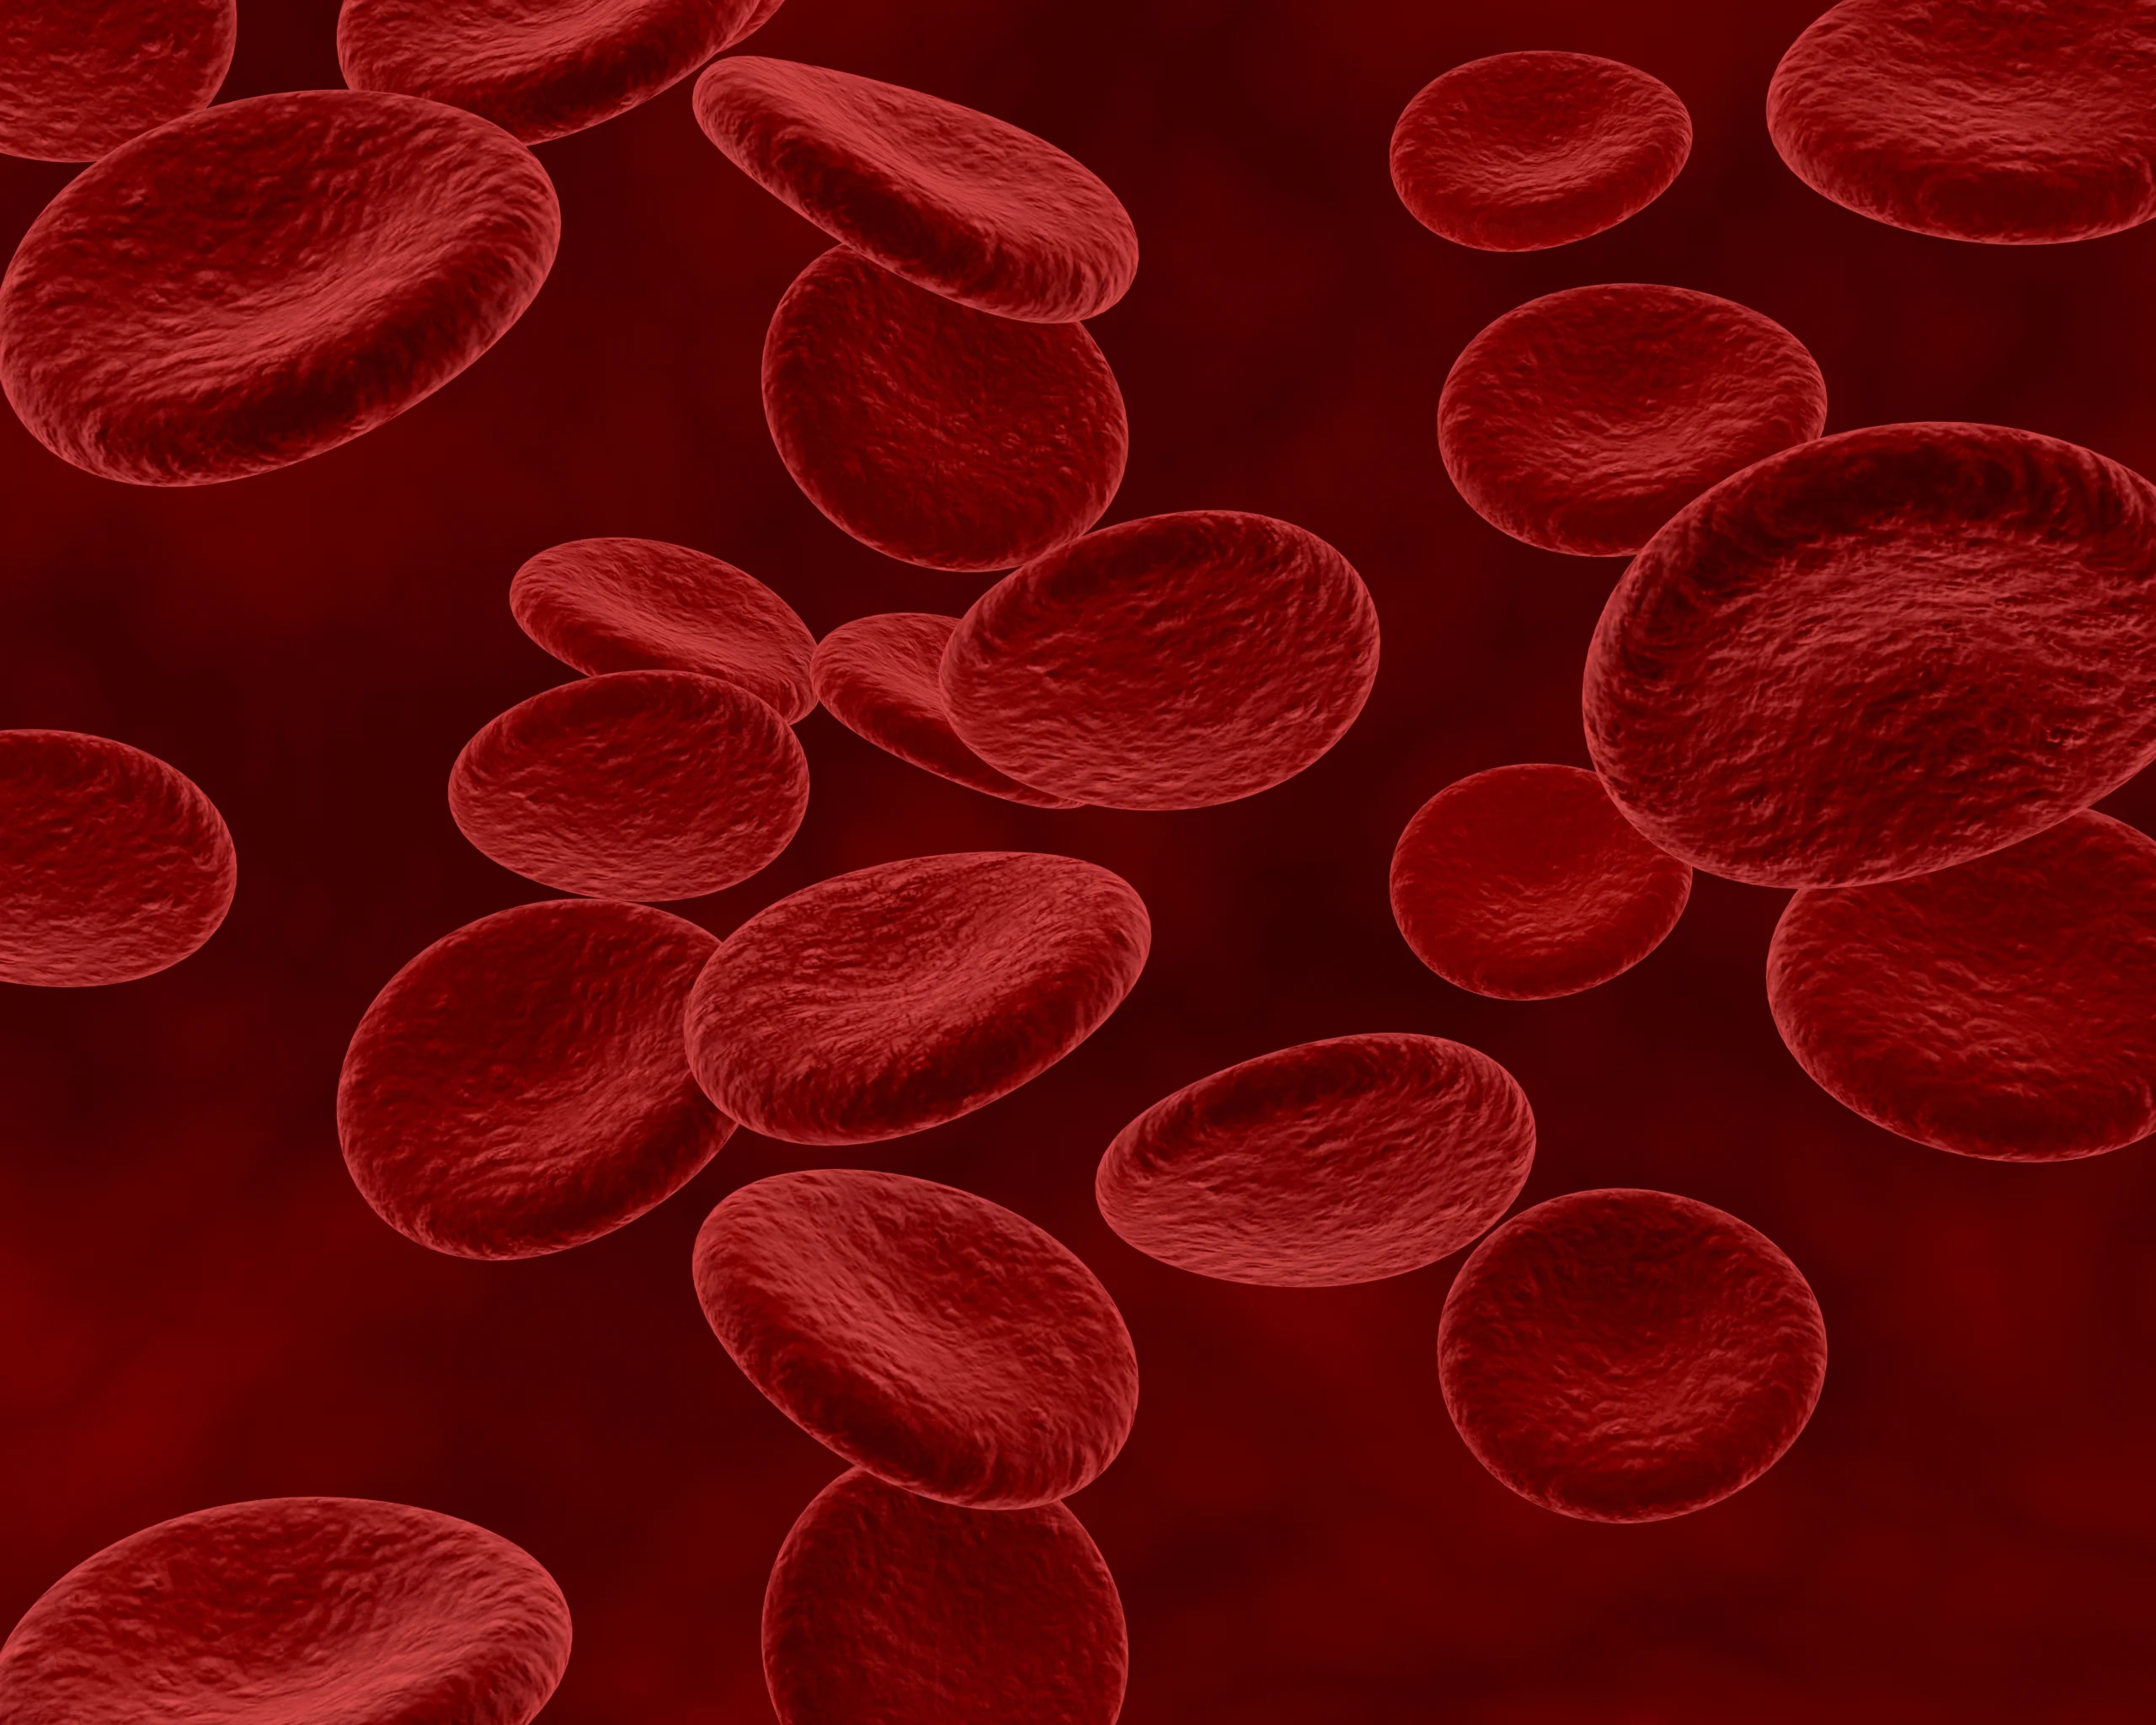 Can anemia cause depression